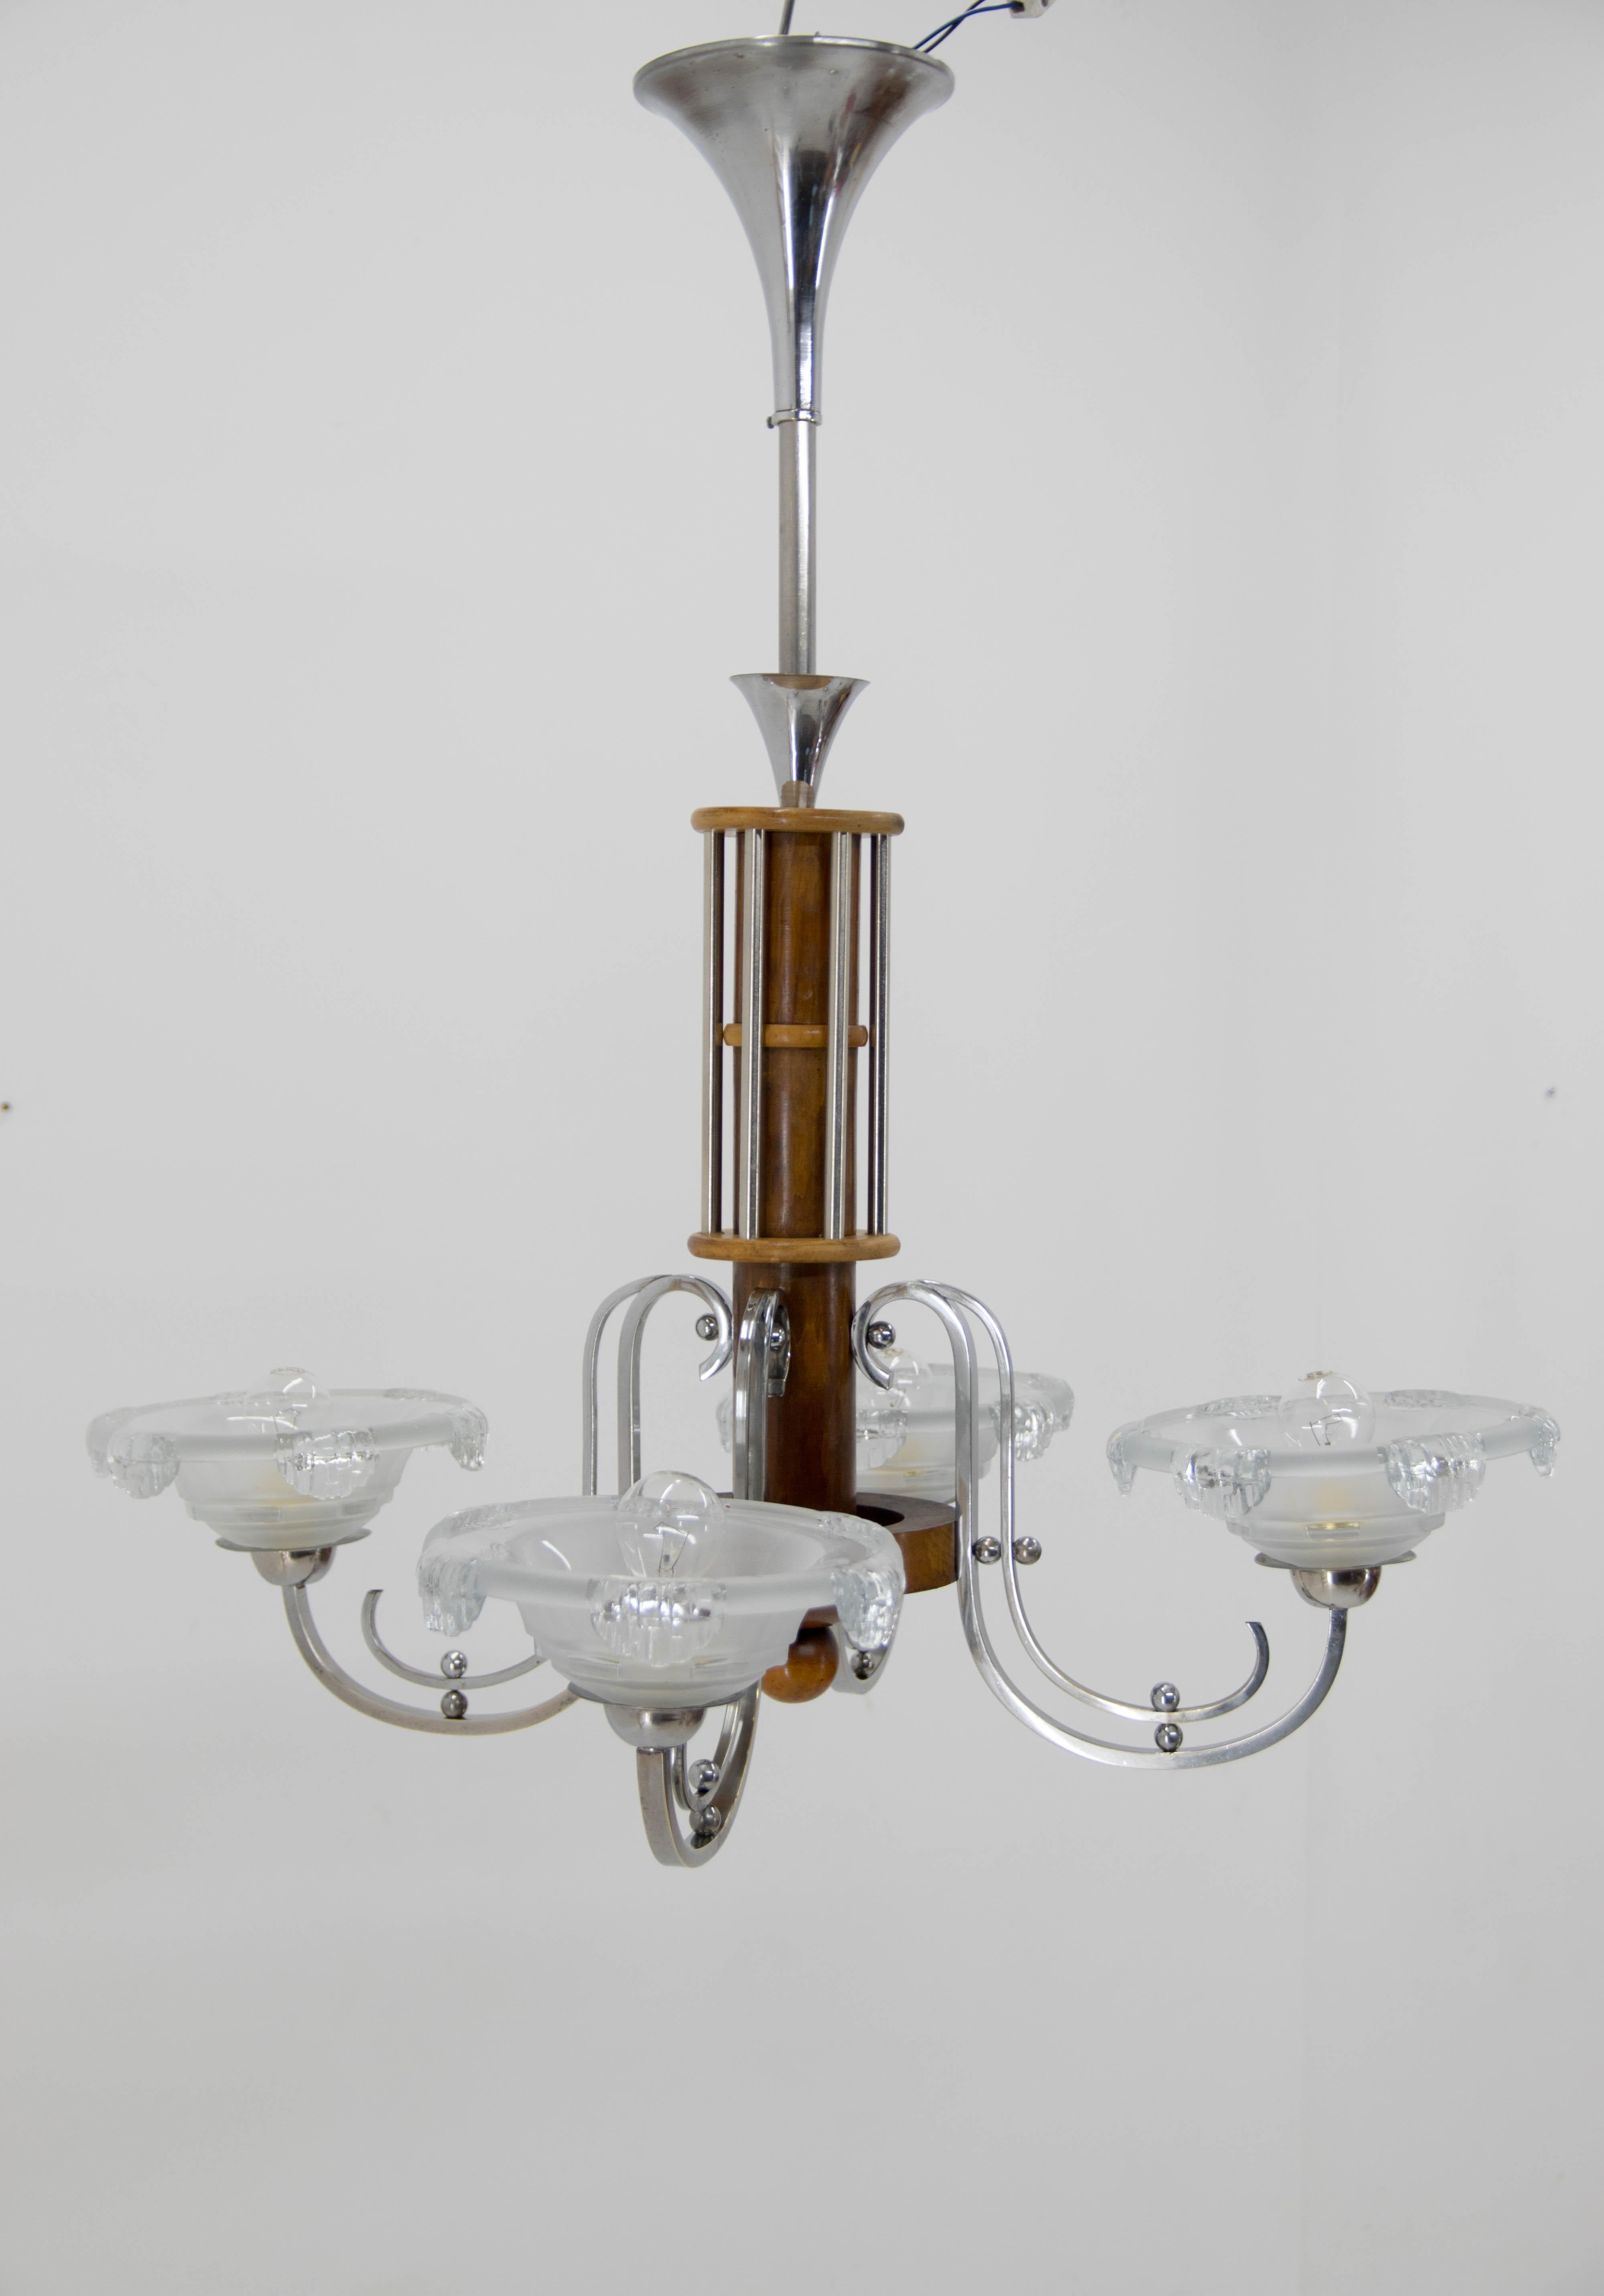 French Art Deco chandelier with the original set of four opaque icicle design molded glass shades. Wooden central column with chrome attributes.
Item was carefully cleaned, polished and rewired: 4x60W, new E12-E14 sockets.
US wiring compatible.